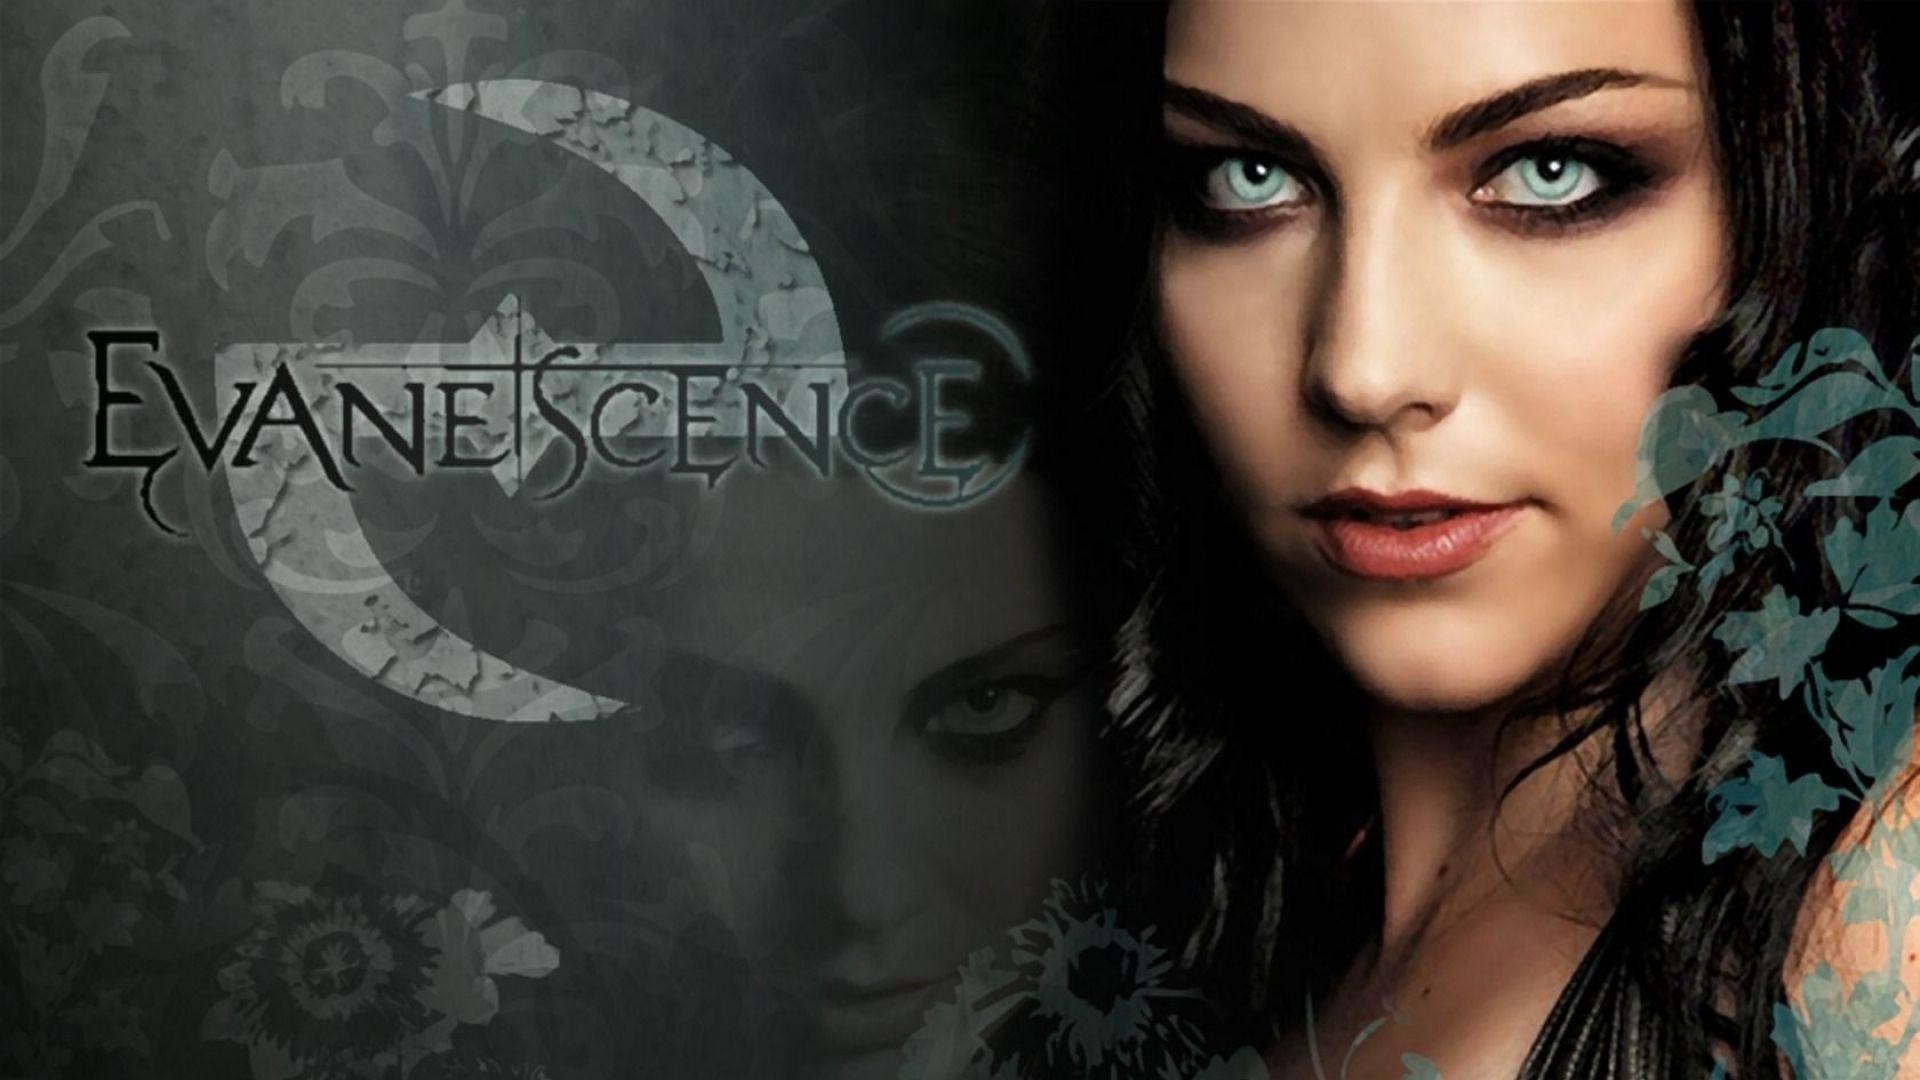 1920x1080 Evanescence Wallpapers 2016 